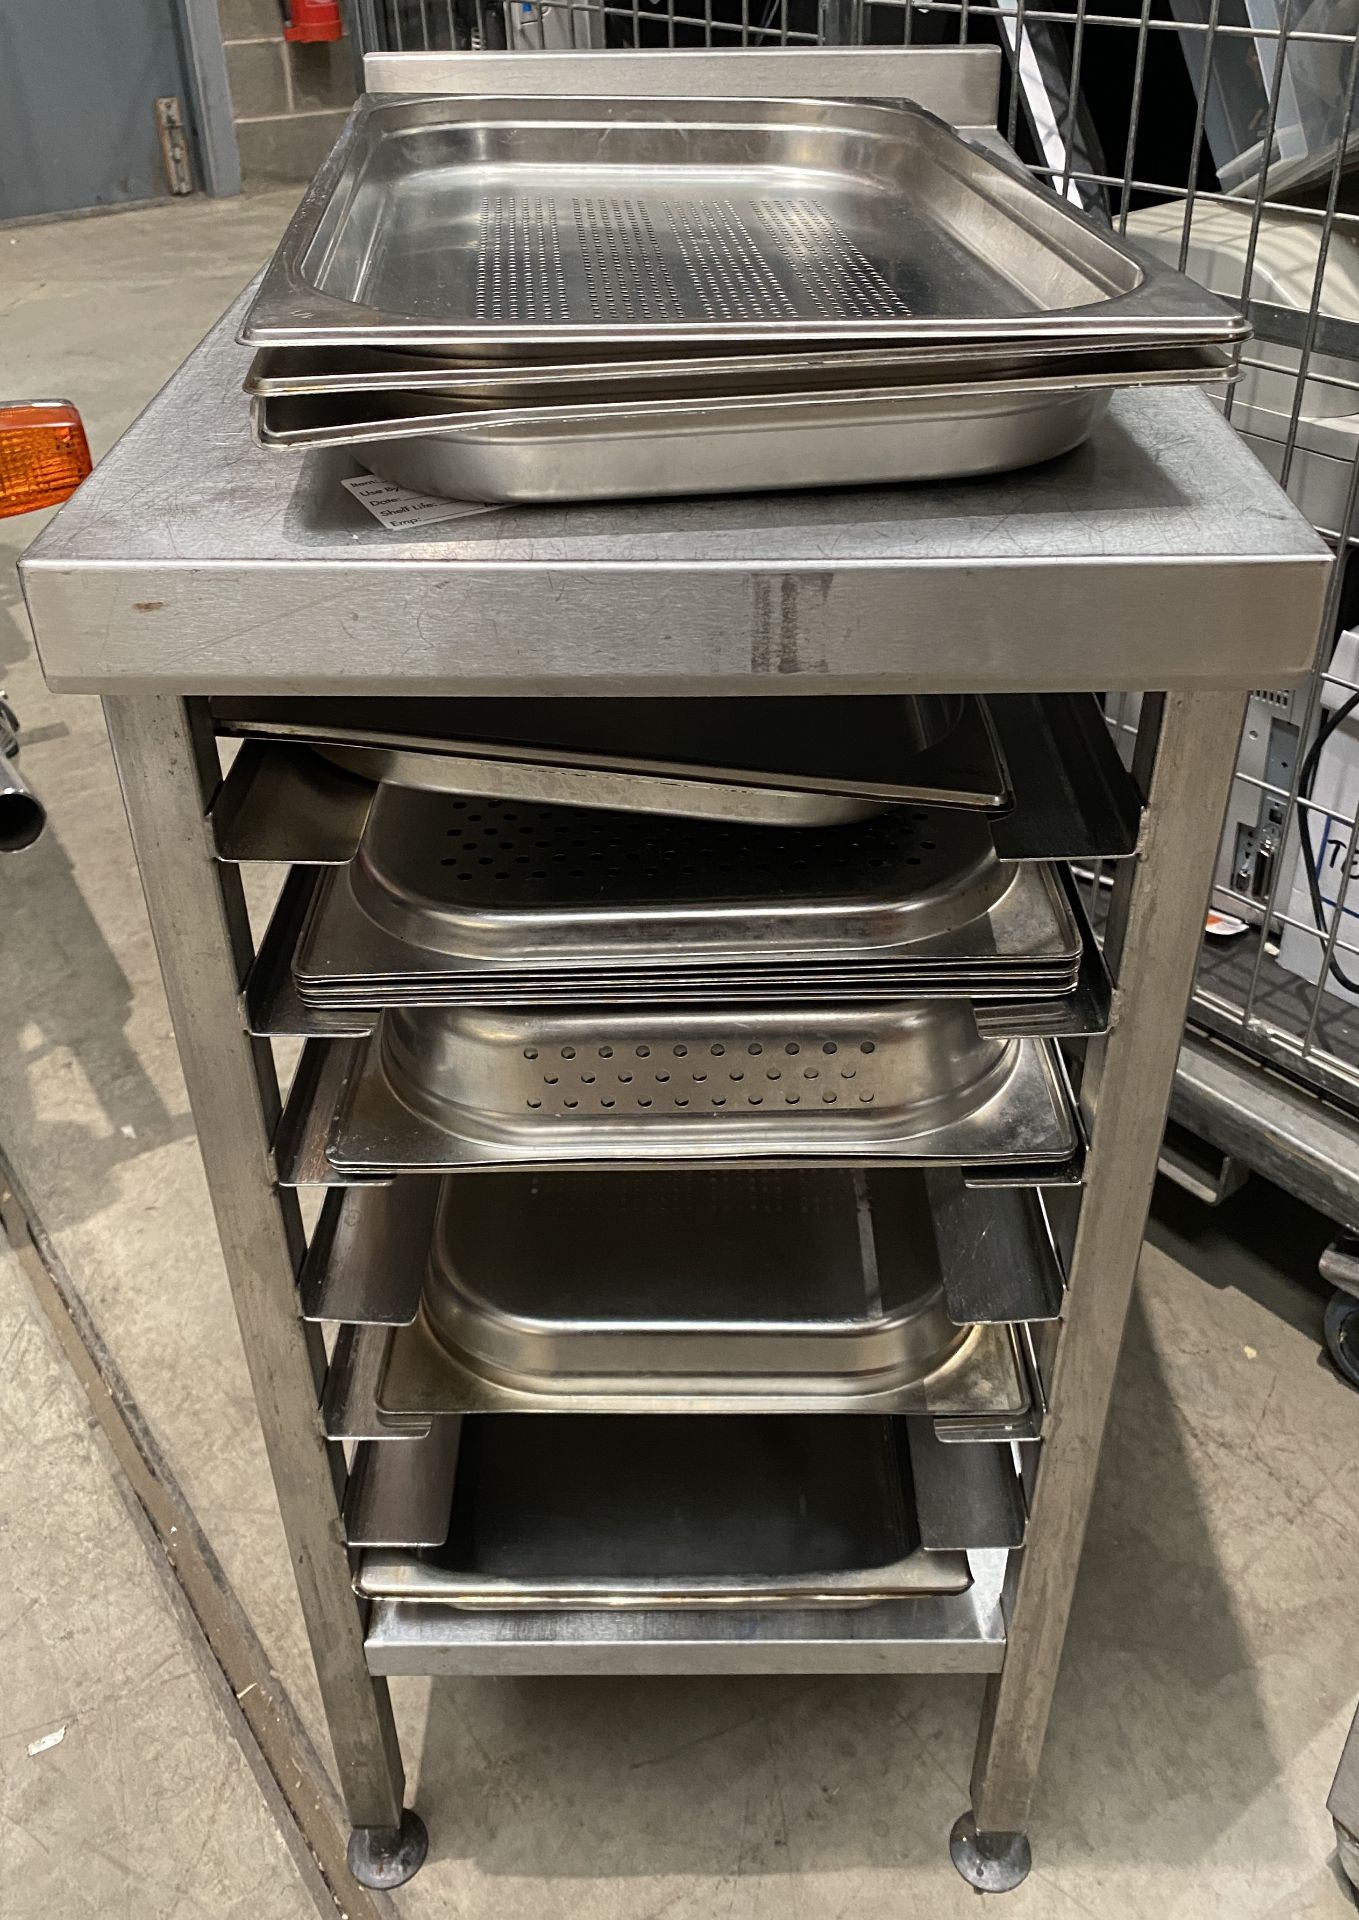 Stainless Steel 7 Rack Preparation Table - 42cm x 74cm - Complete with 14 x Assorted Steamer and